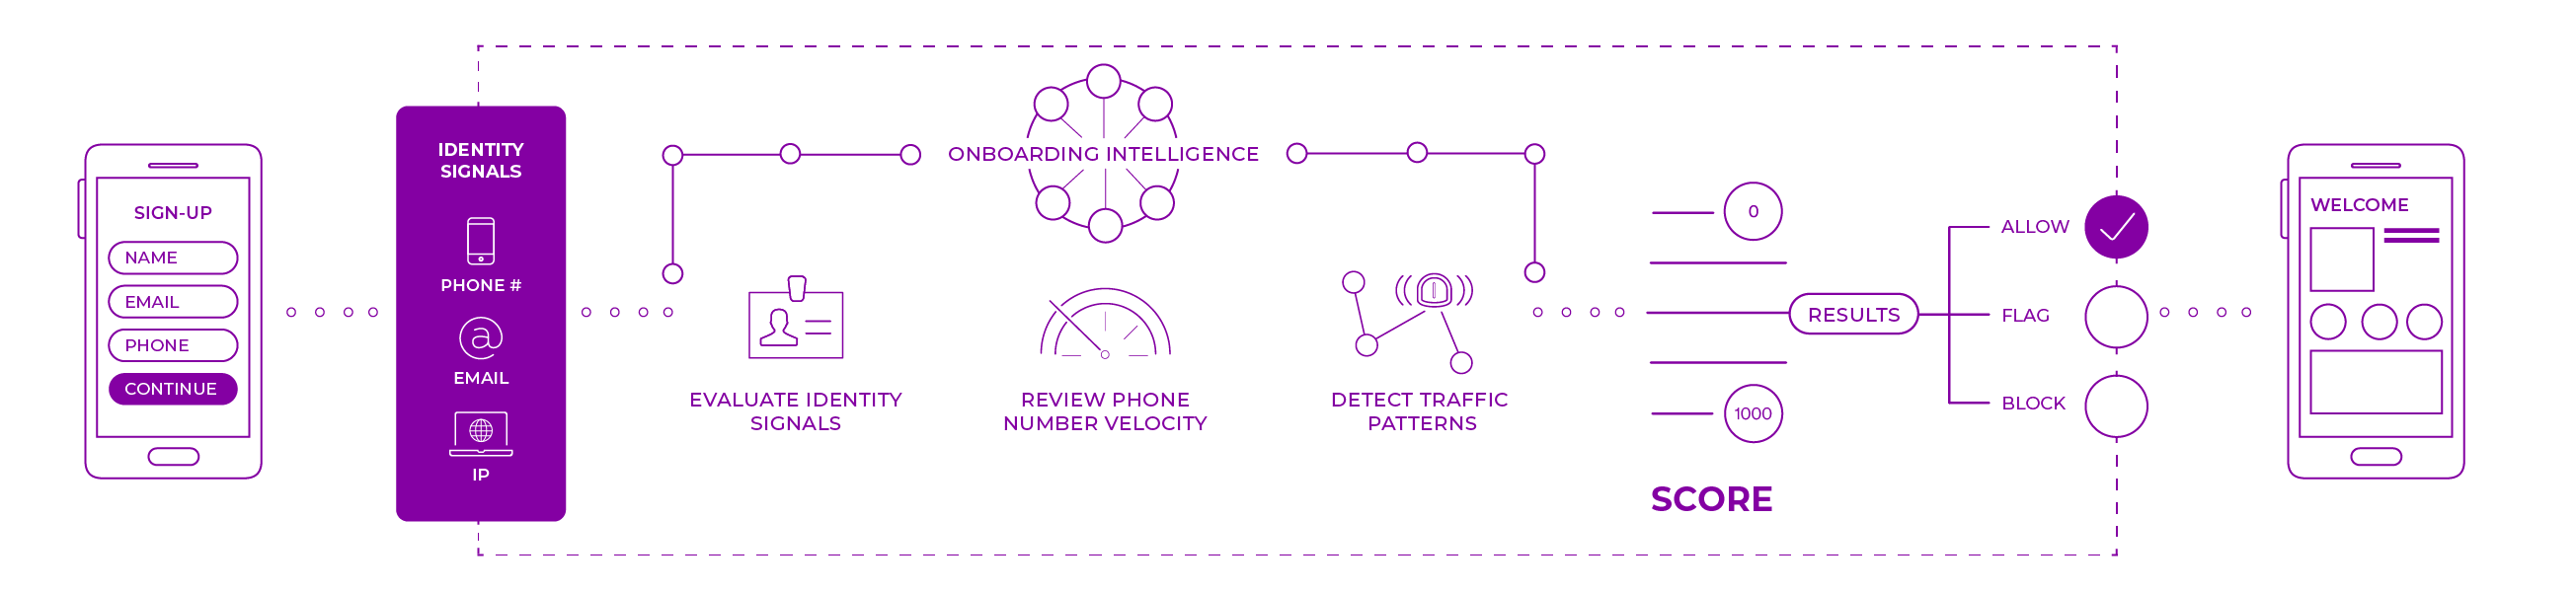 An illustration showing how onboarding intelligence works.